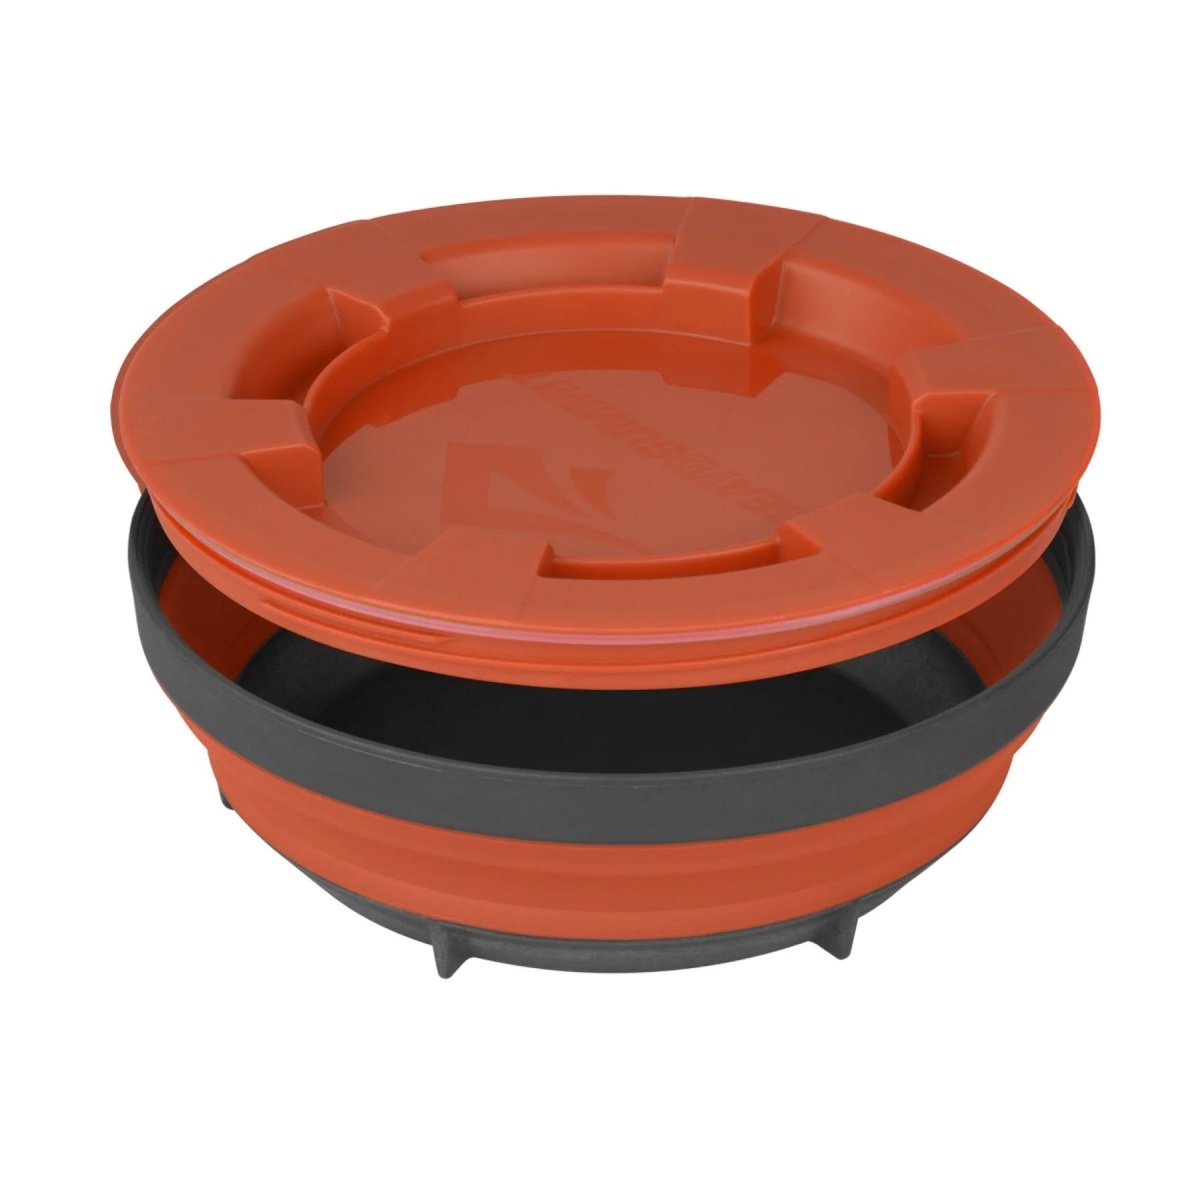 Sea to Summit X-Seal & Go Container - XL Rust | Sea to Summit | A247 Gear